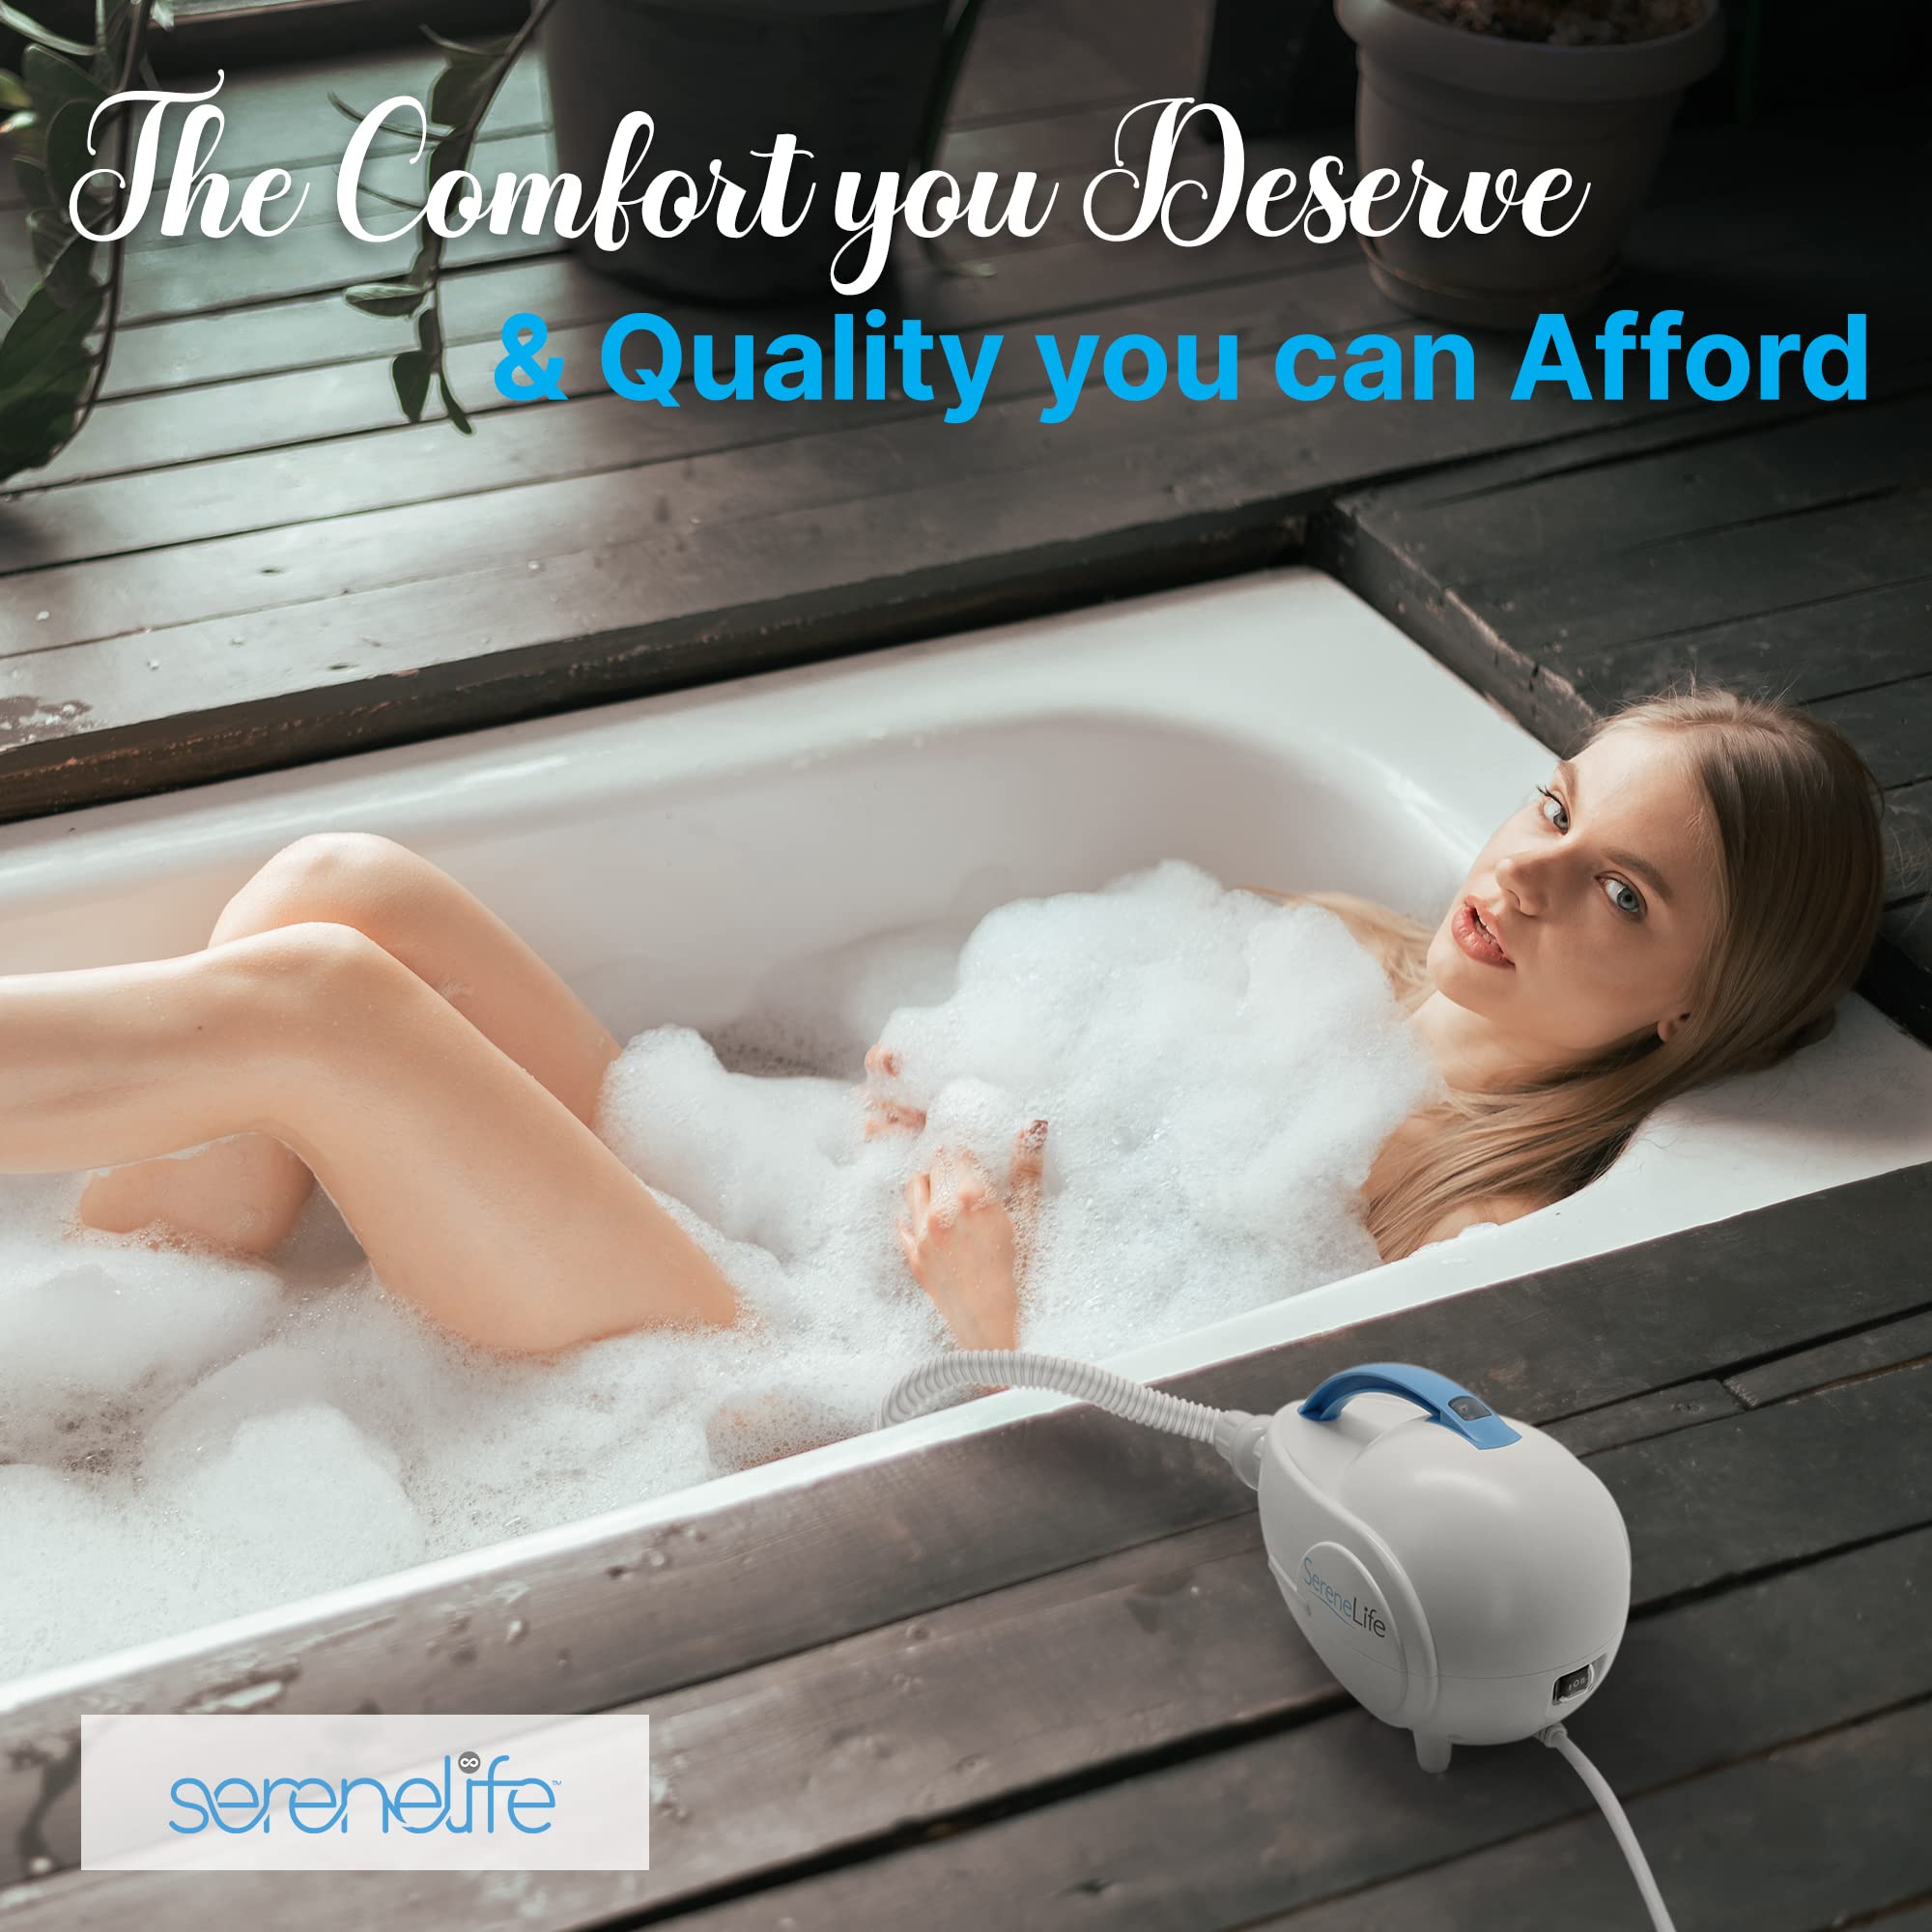 SereneLife Electric Bathtub Bubble Massage Mat - Waterproof Tub Massaging Spa, Full Body Bubbling Bath Thermal Massager Machine w/Heat with Motorized Air Pump and Aroma Clip for Oil